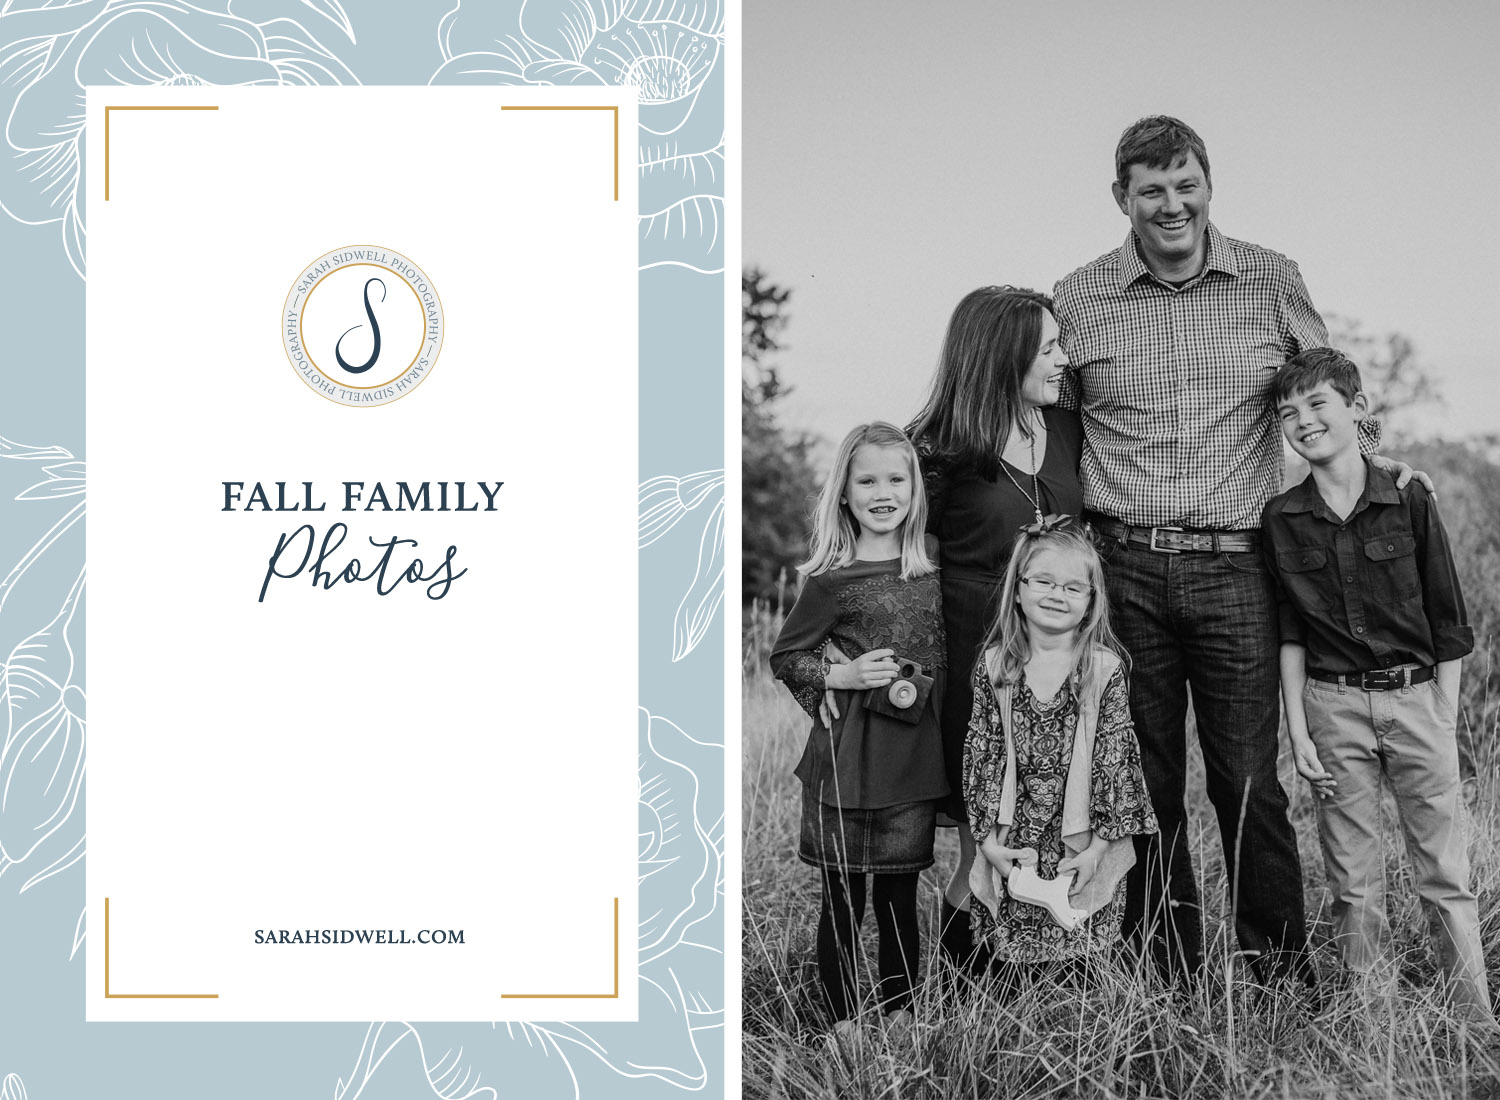 nashville photographer takes outdoor fall family photos of family who choose great fall clothes to wear to their session in Franklin Tn.jpg